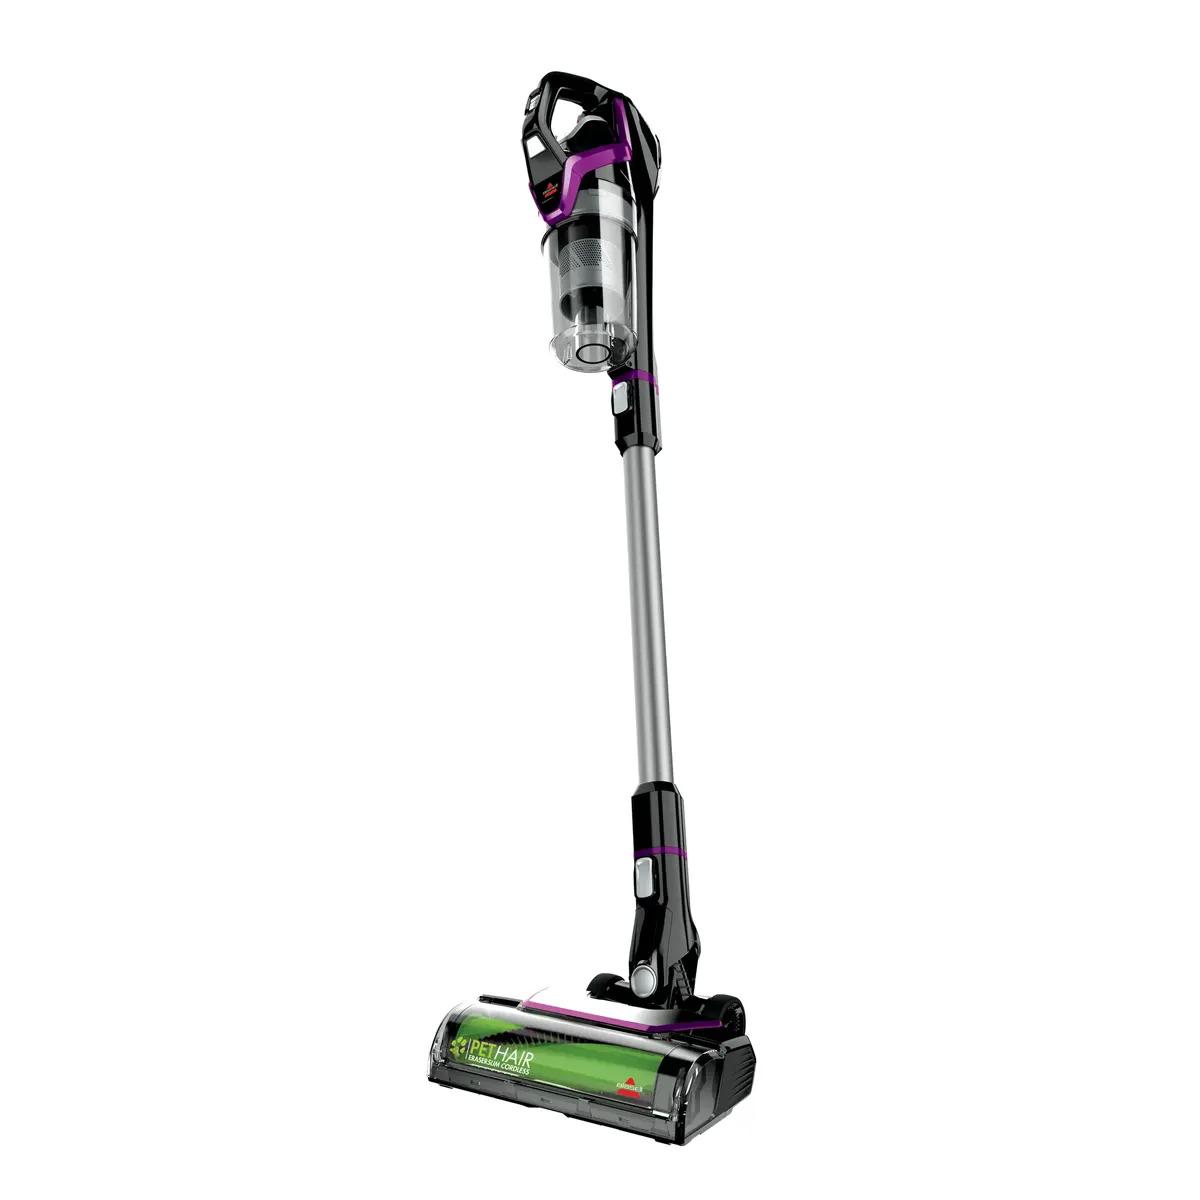 Bissell Pet Hair Eraser Slim Cordless Vacuum Cleaner for $97 Shipped